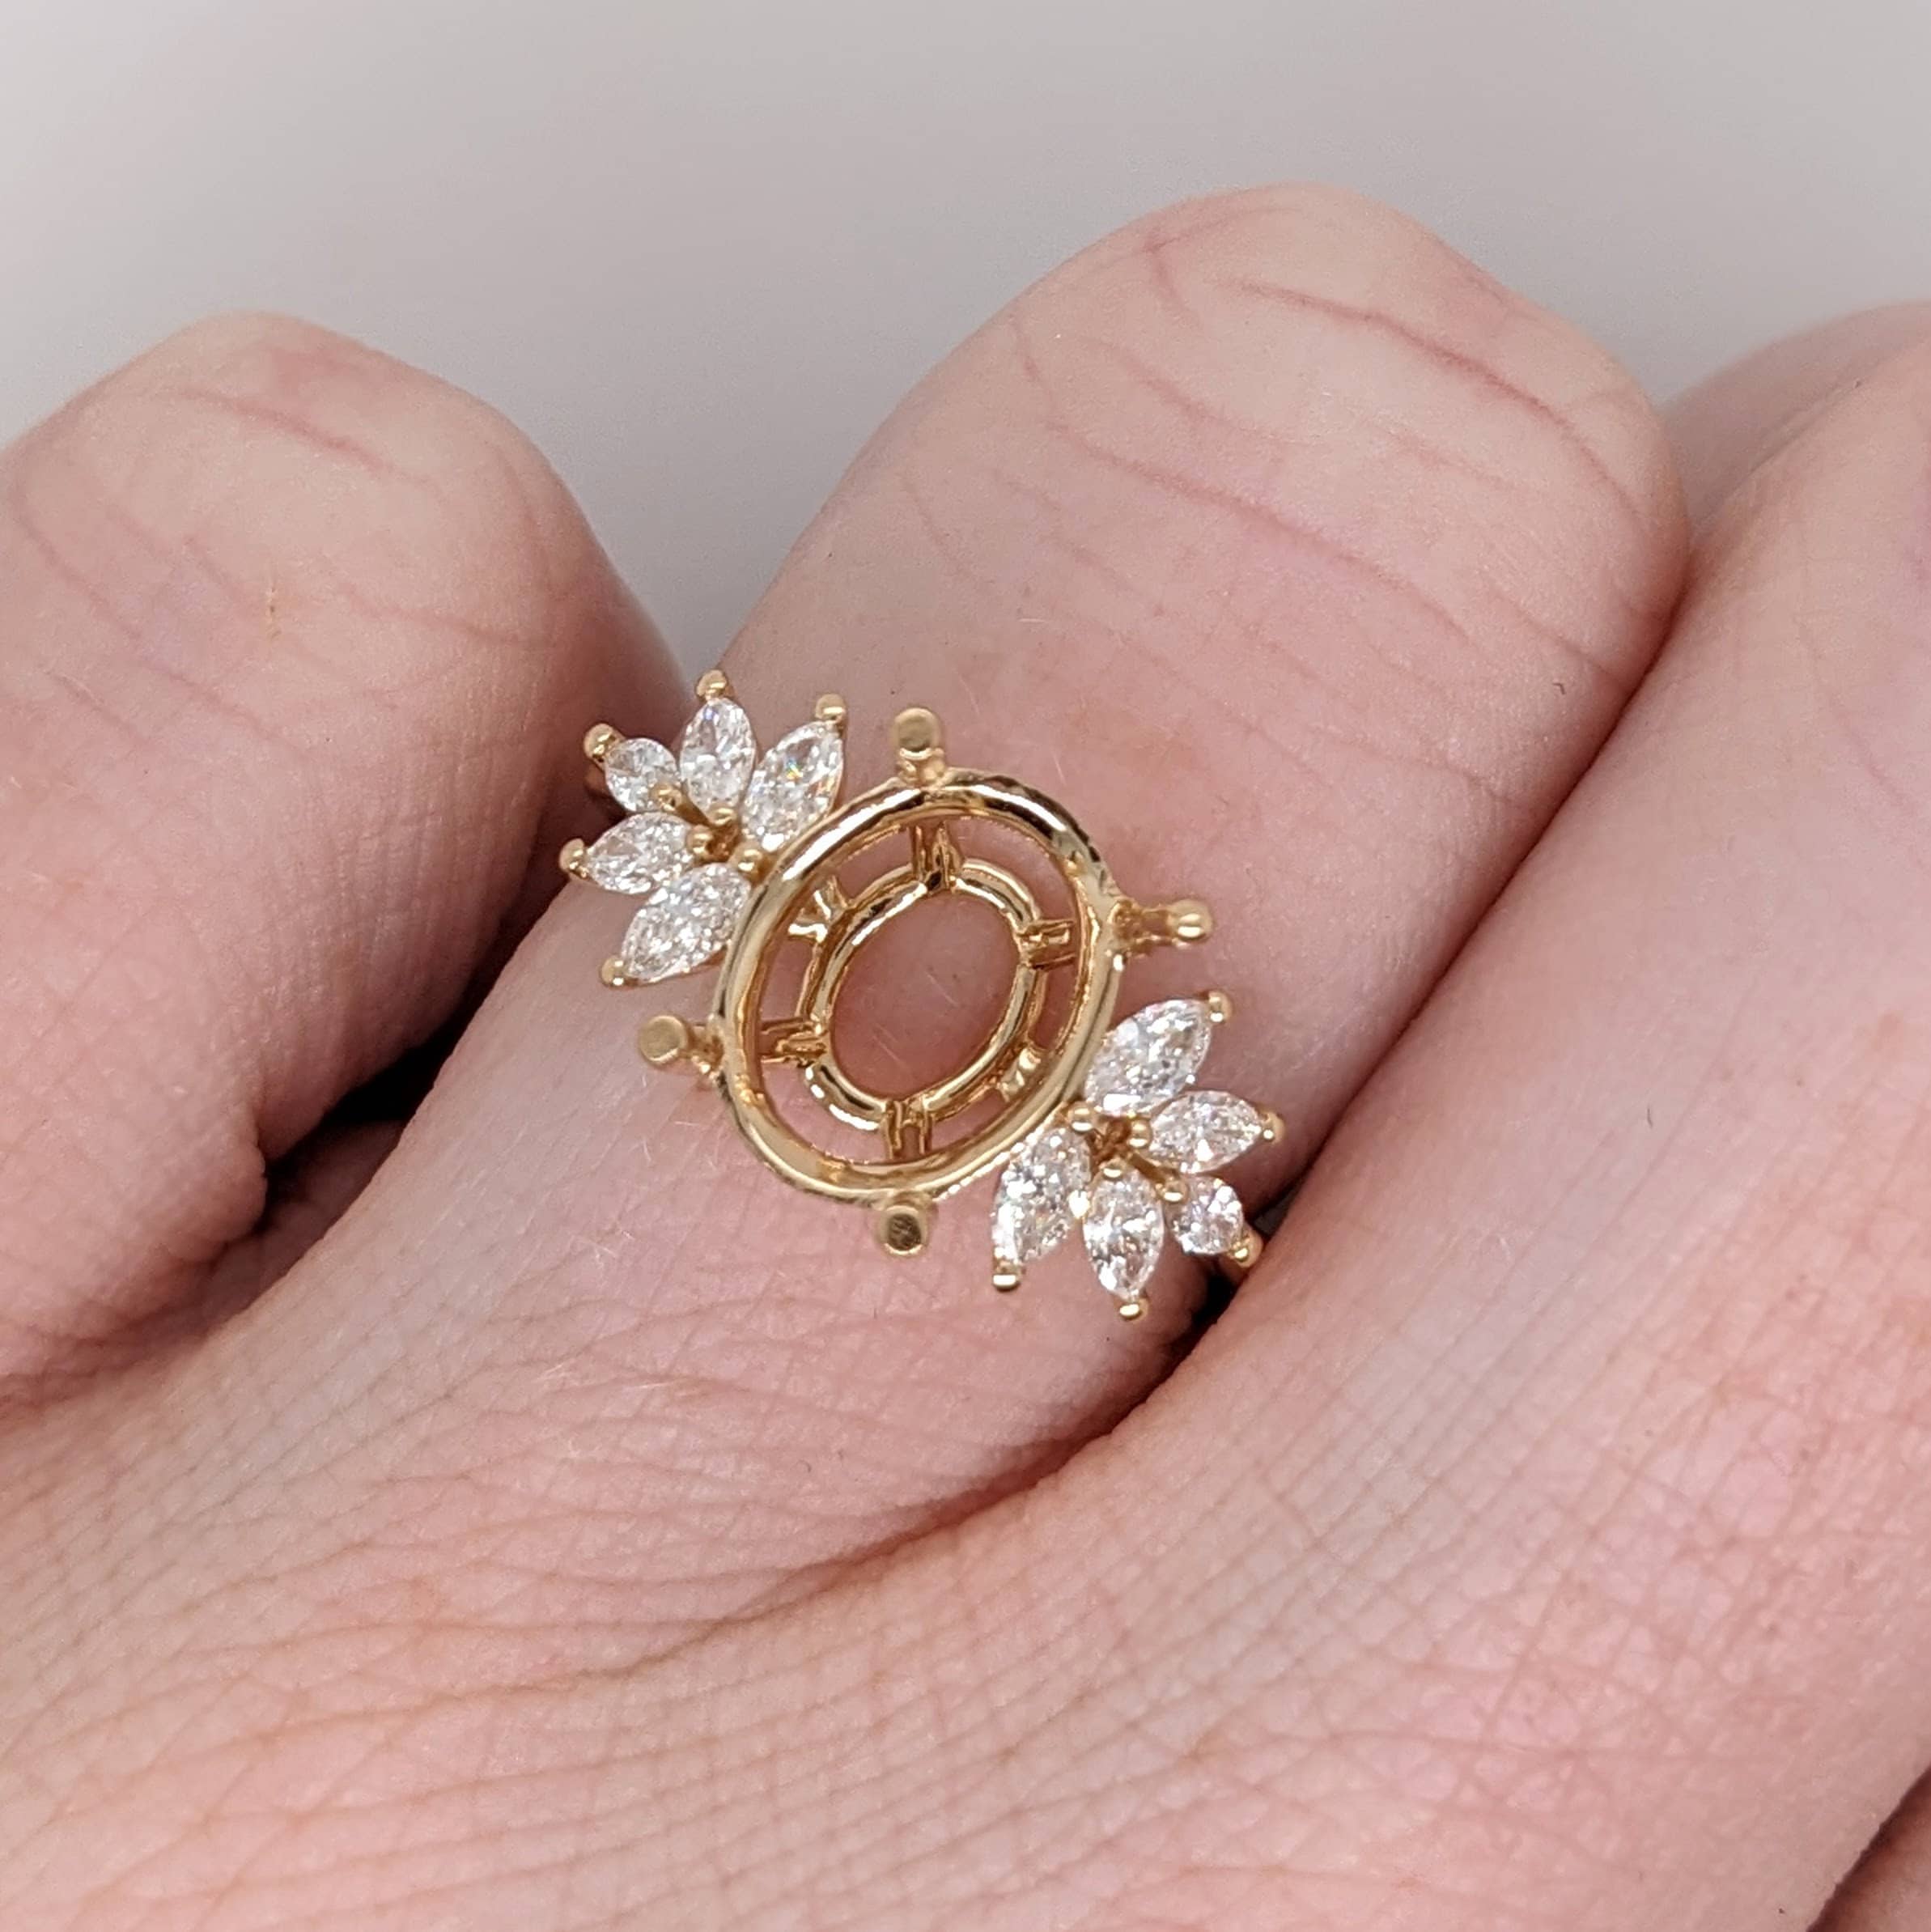 Statement Rings-Oval Ring Semi Mount in Solid 14k White, Yellow or Rose Gold with Natural Diamond Accents | Oval 10x8mm | Gemstone Setting | Customizable - NNJGemstones